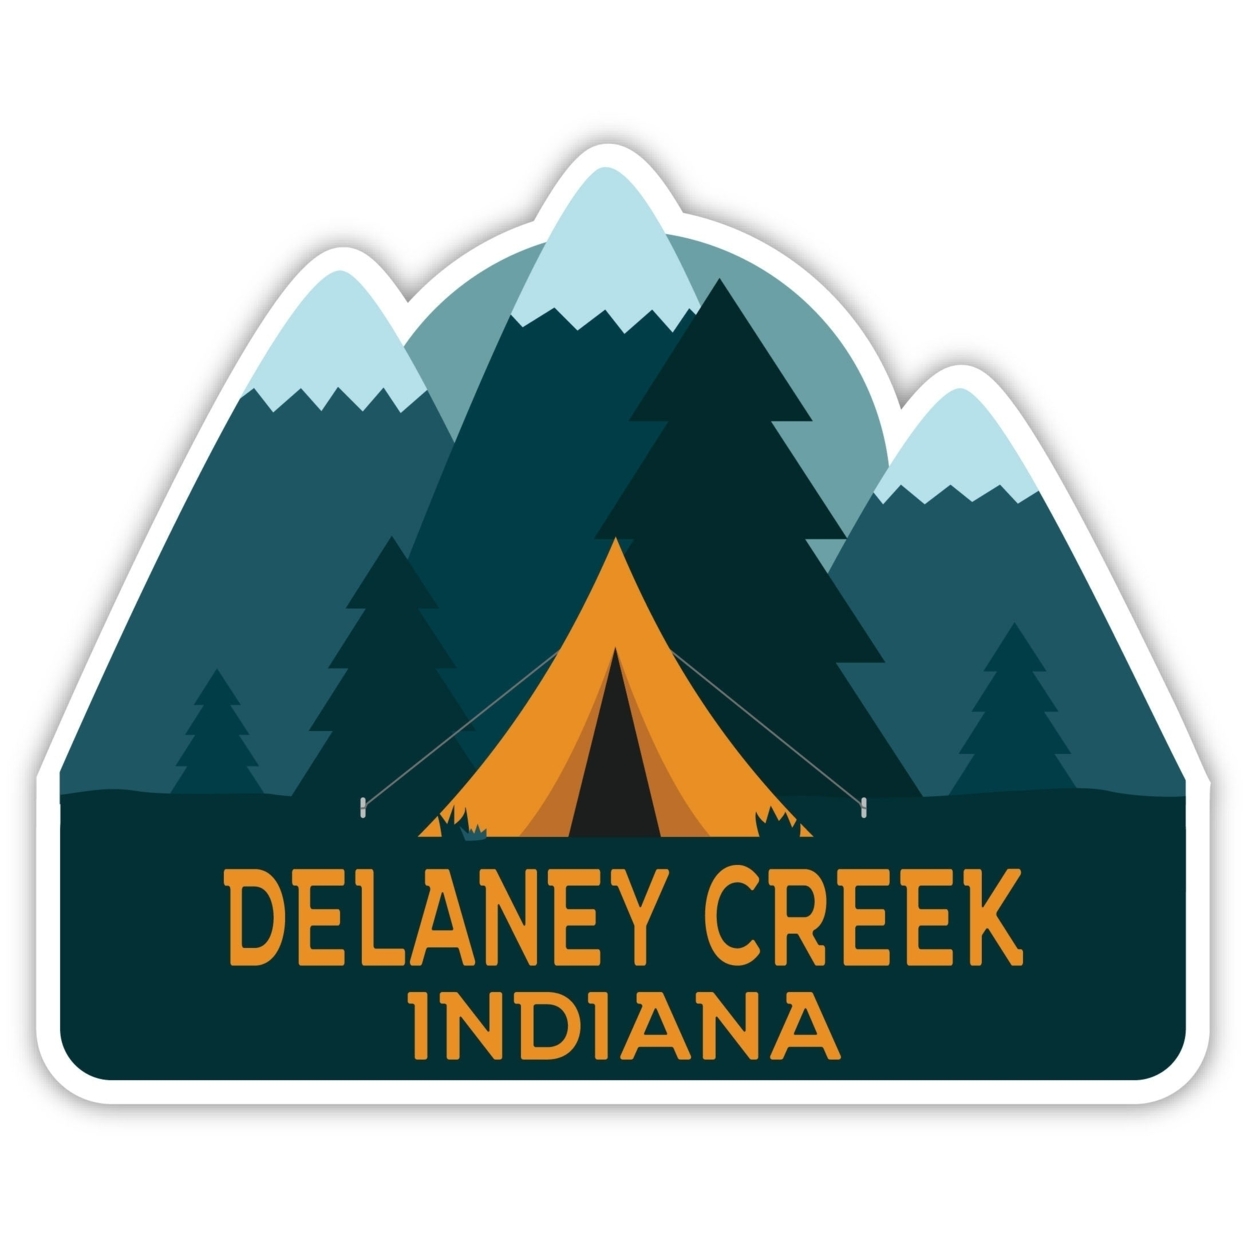 Delaney Creek Indiana Souvenir Decorative Stickers (Choose Theme And Size) - 4-Pack, 4-Inch, Tent